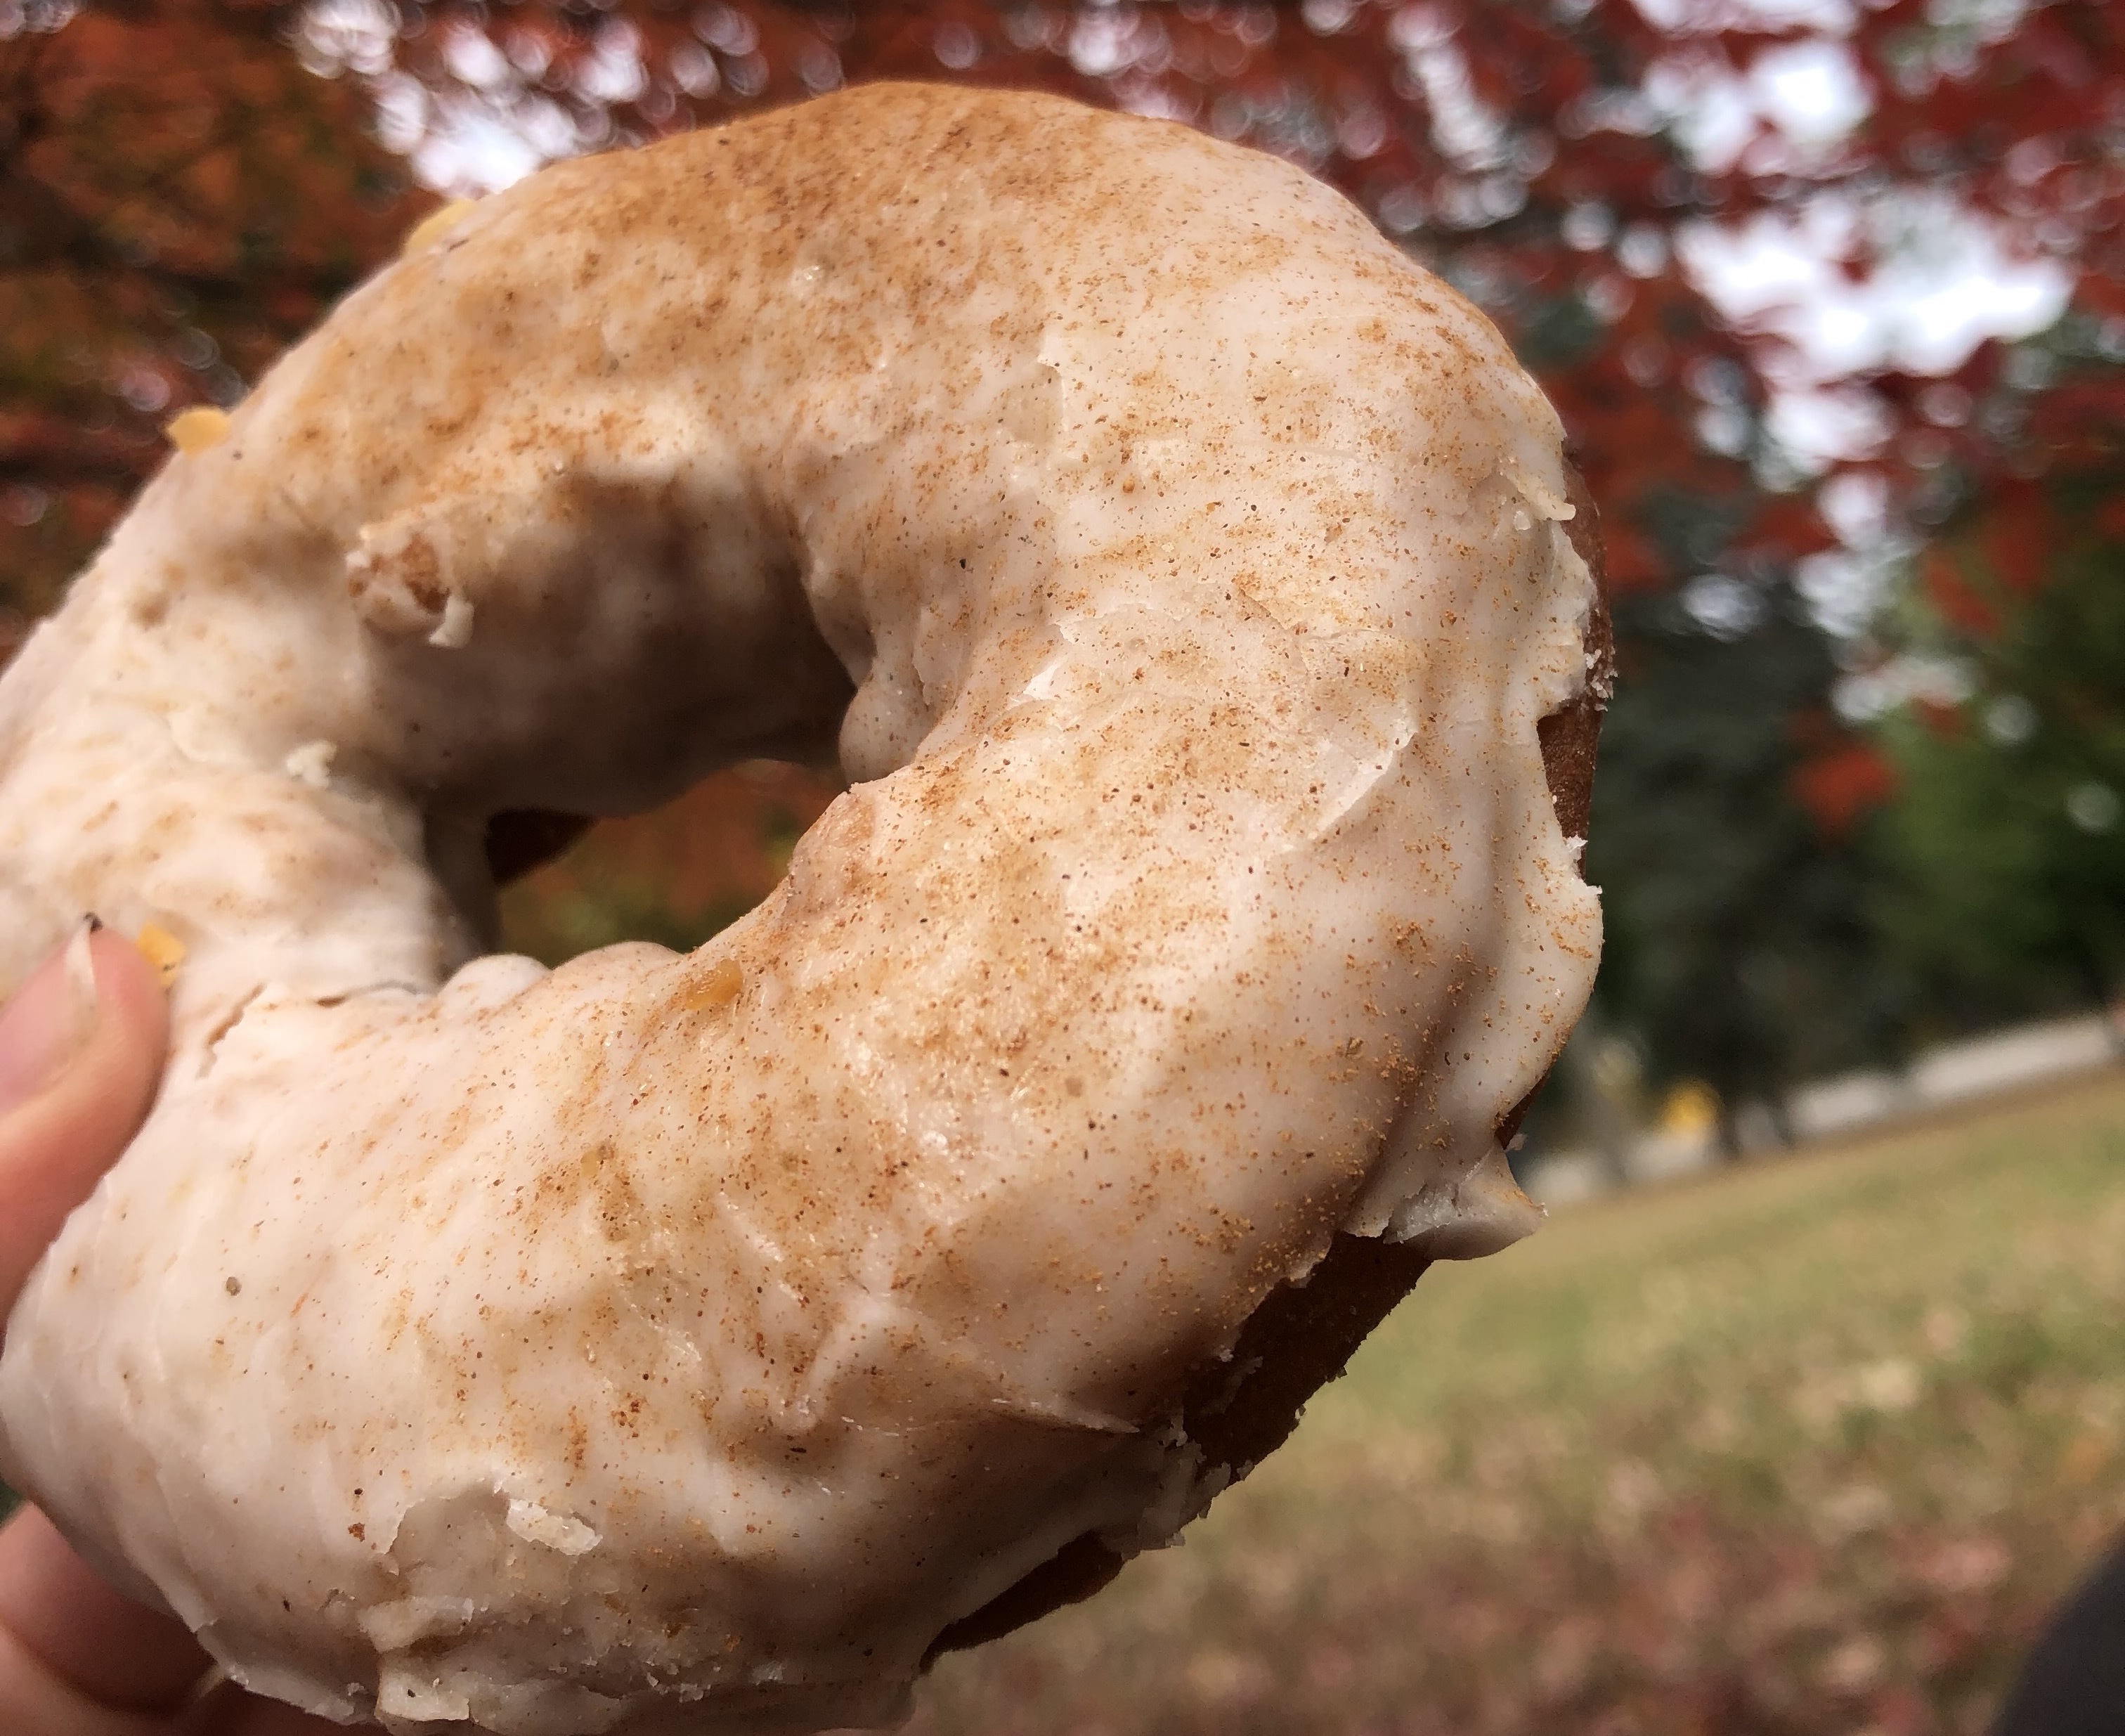 A frosted doughnut dusted in cinnamon, held up with park greenery in the background.